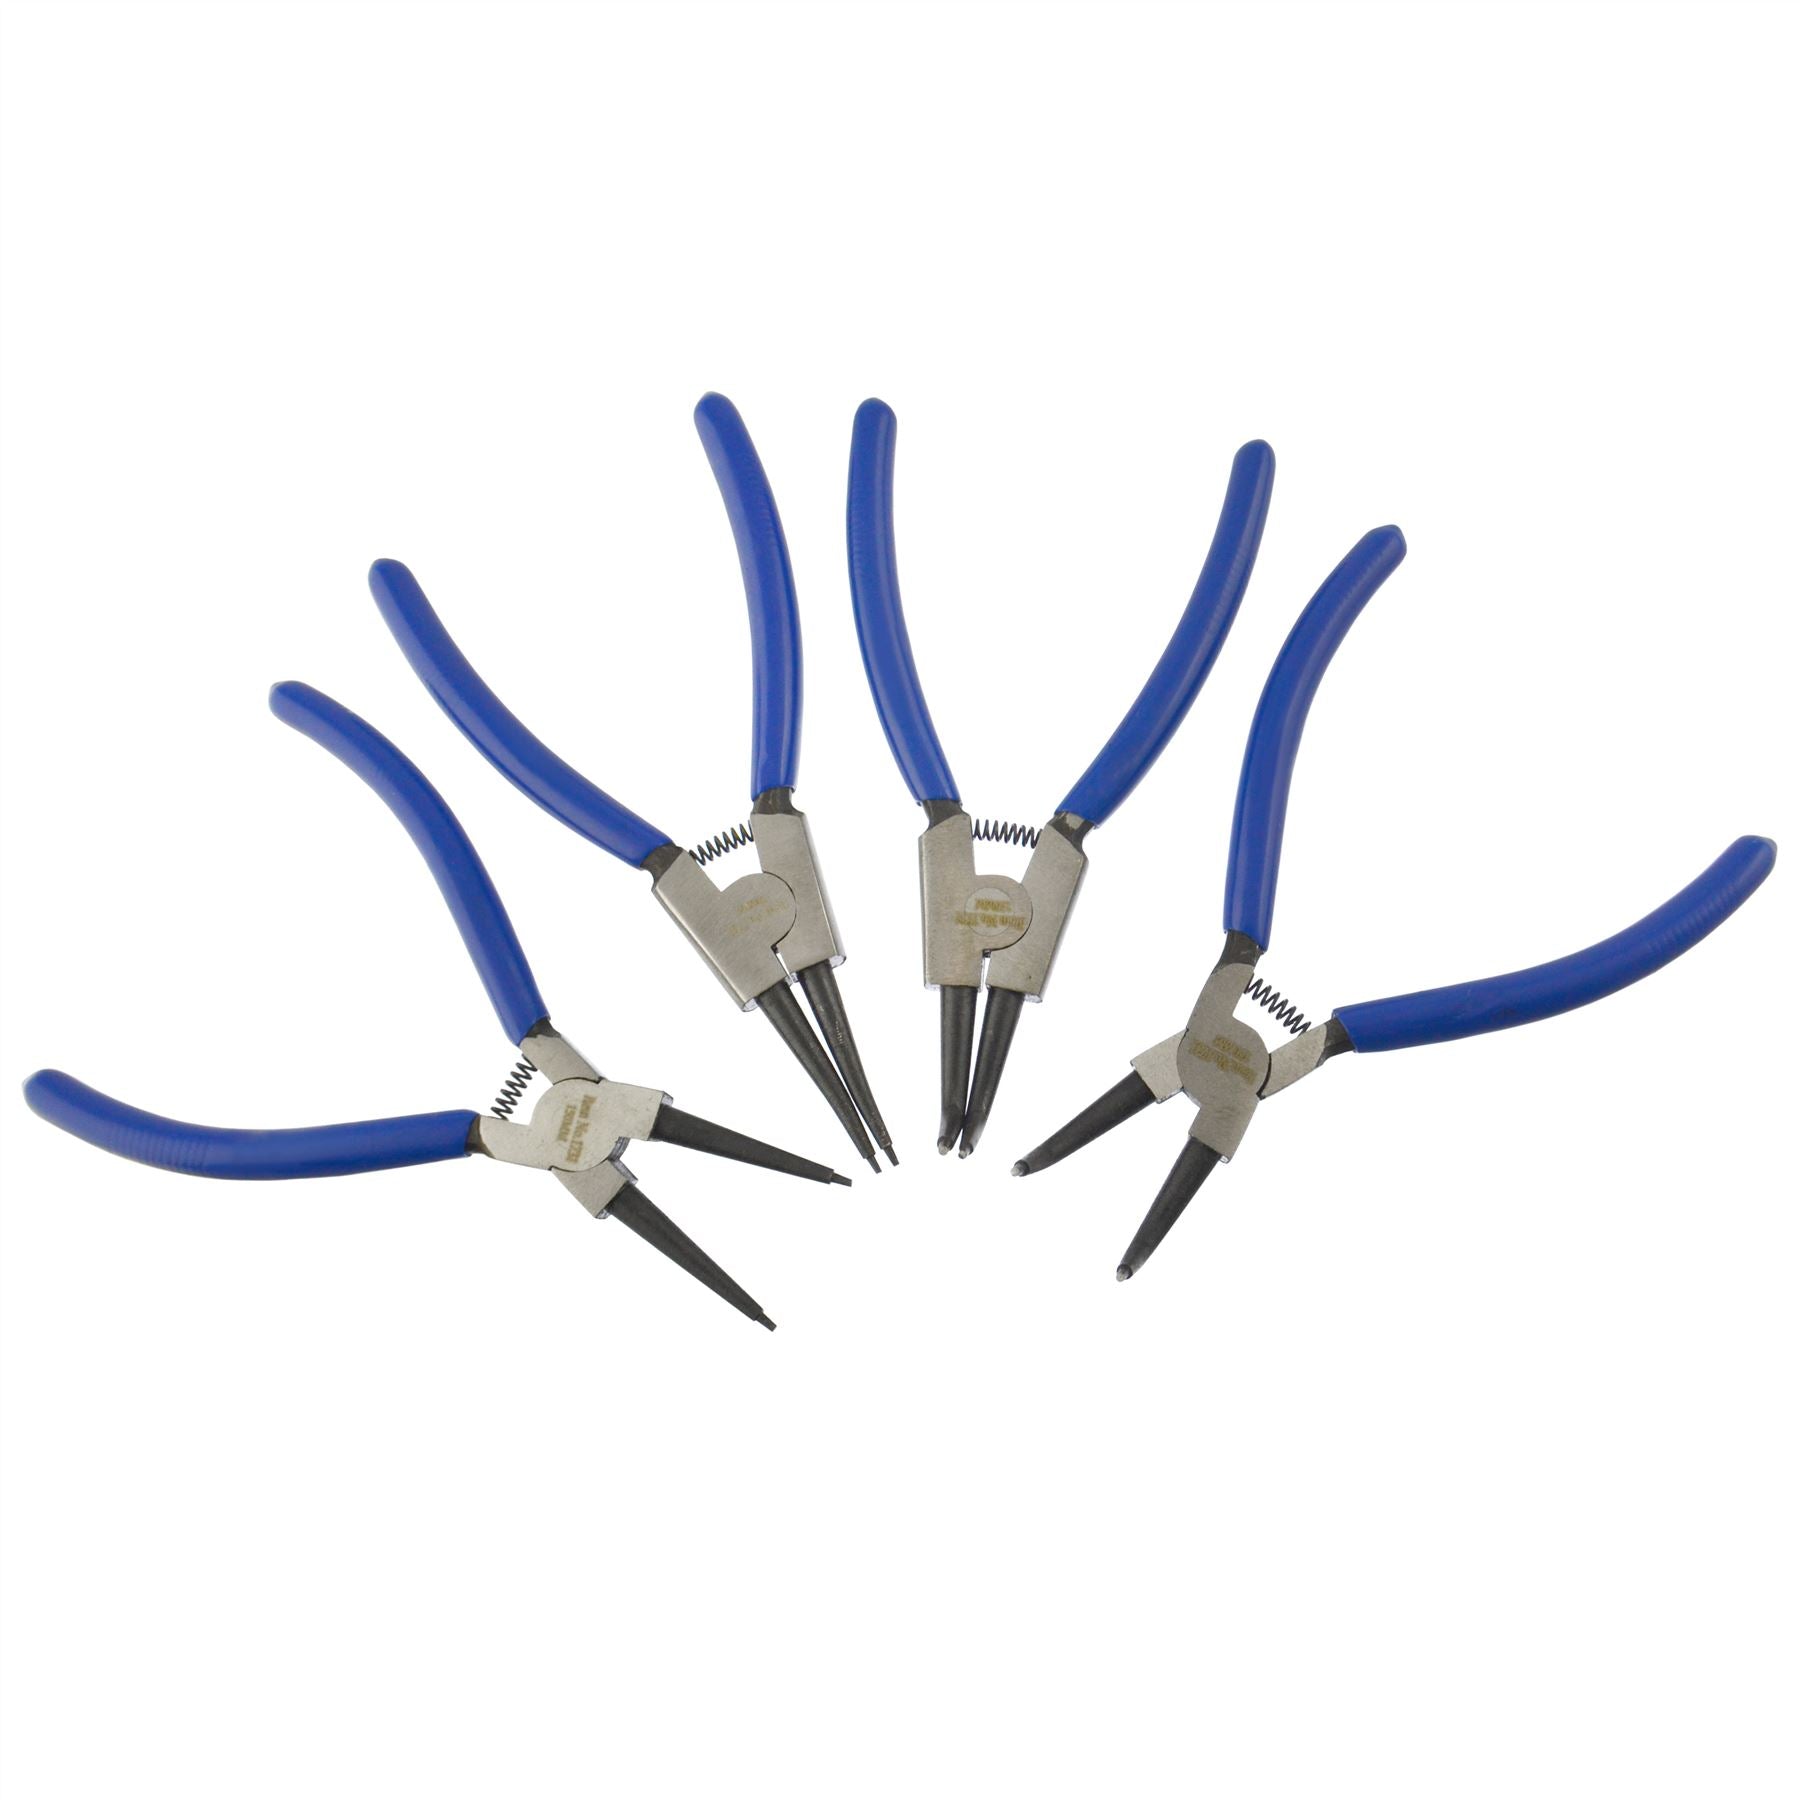 6" And 12" Circlip Plier Pliers Sets Internal and External / Bent and Straight